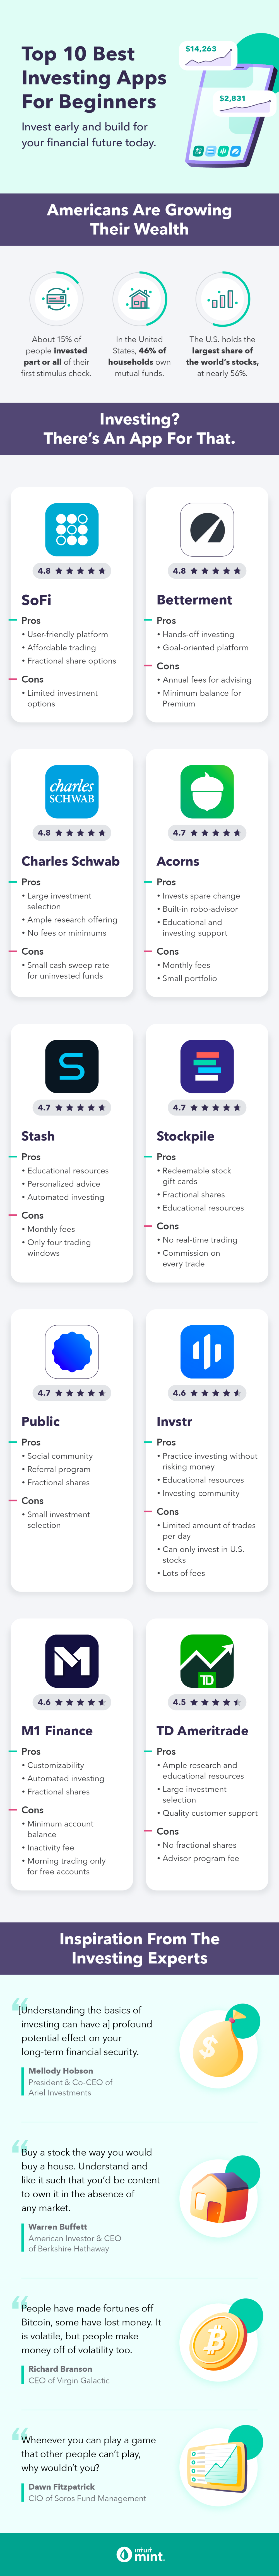 best-investing-apps